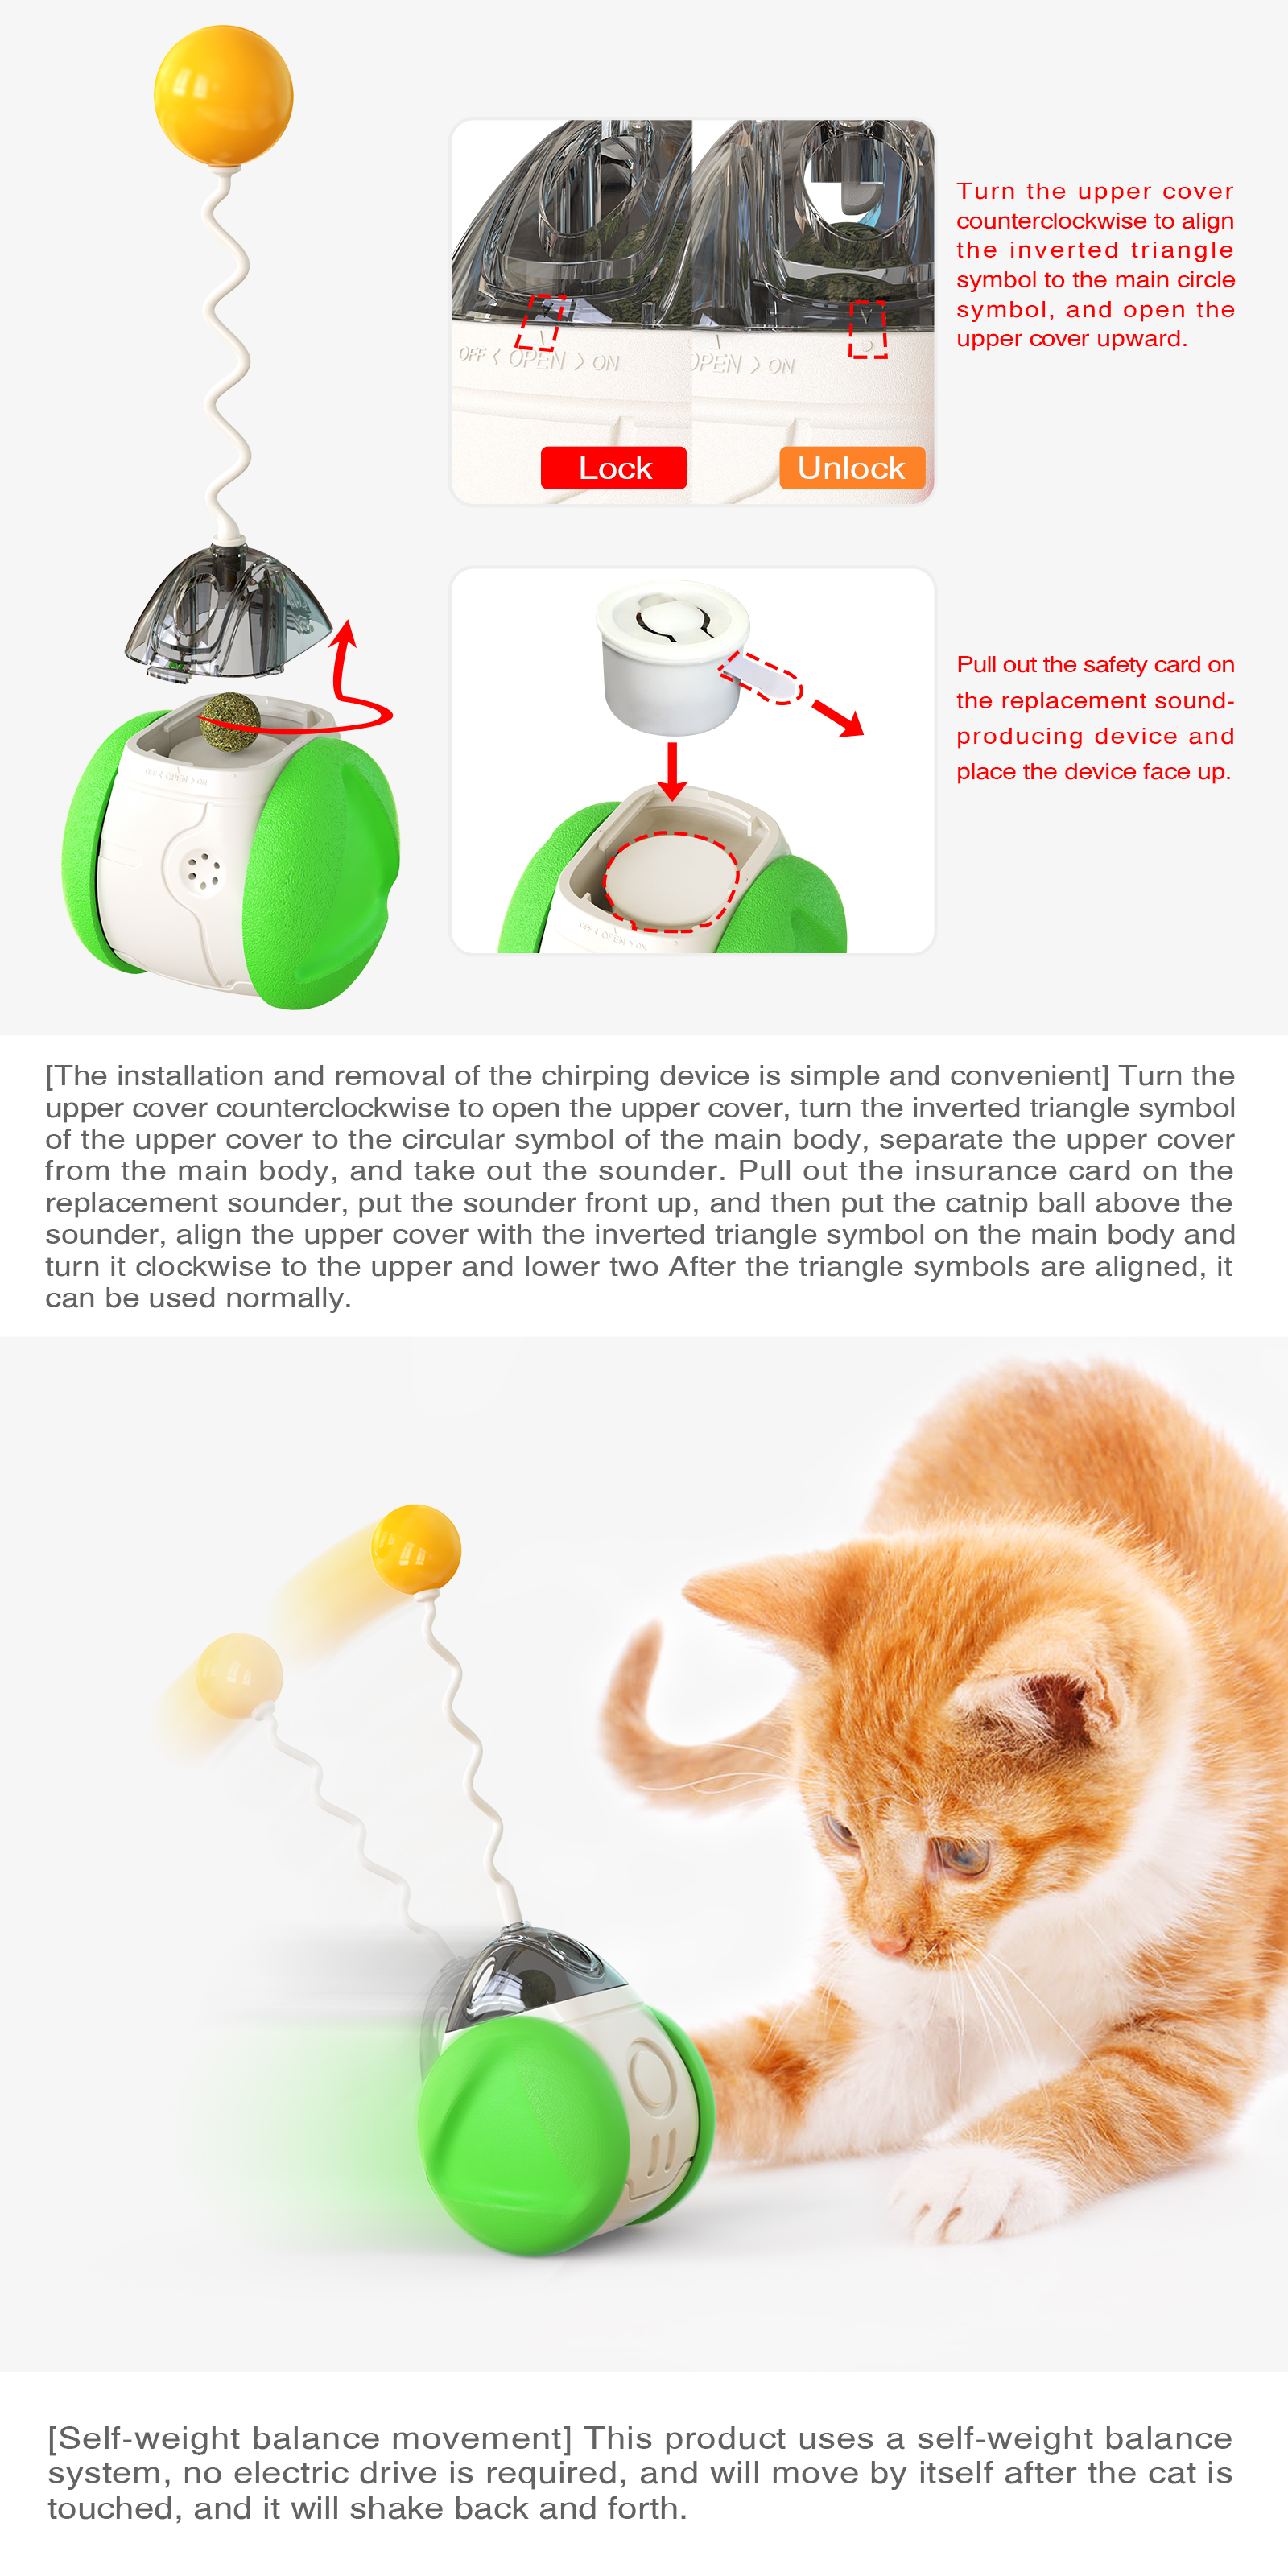 Pet Supplies Factory Wholesale Company New Explosive Amazon Sound Tumbler Cat Toy Ball Funny Cat Stick